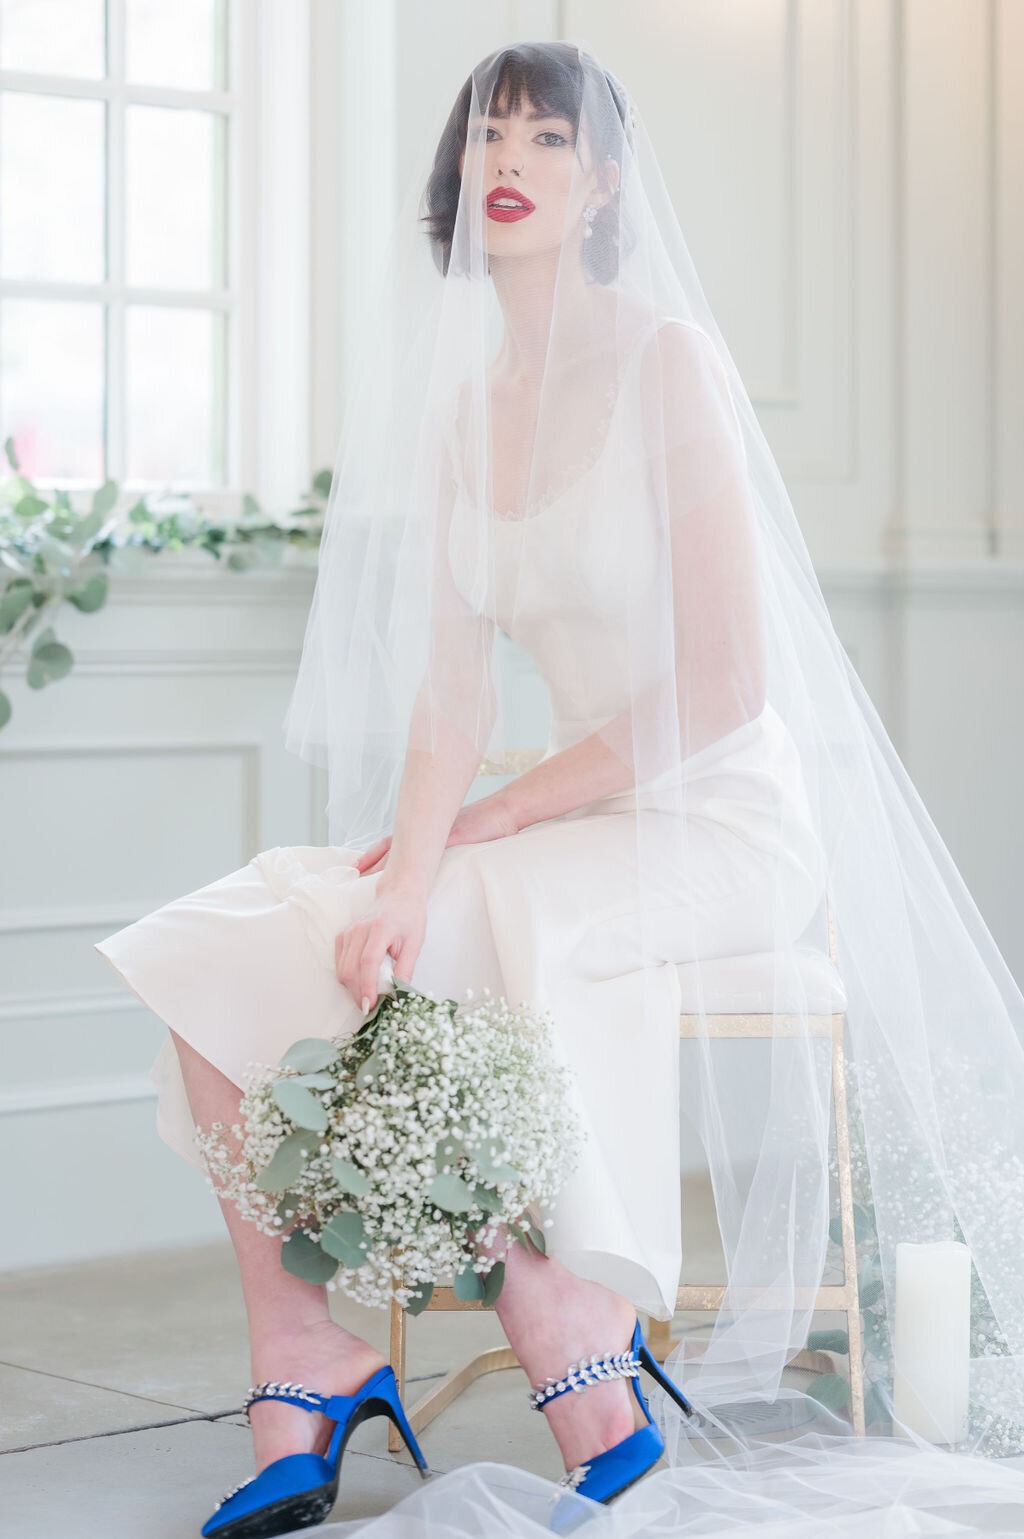 The foldover blusher of the mantilla-style Orchids veil drapes over the head for a dramatic and romantic look.